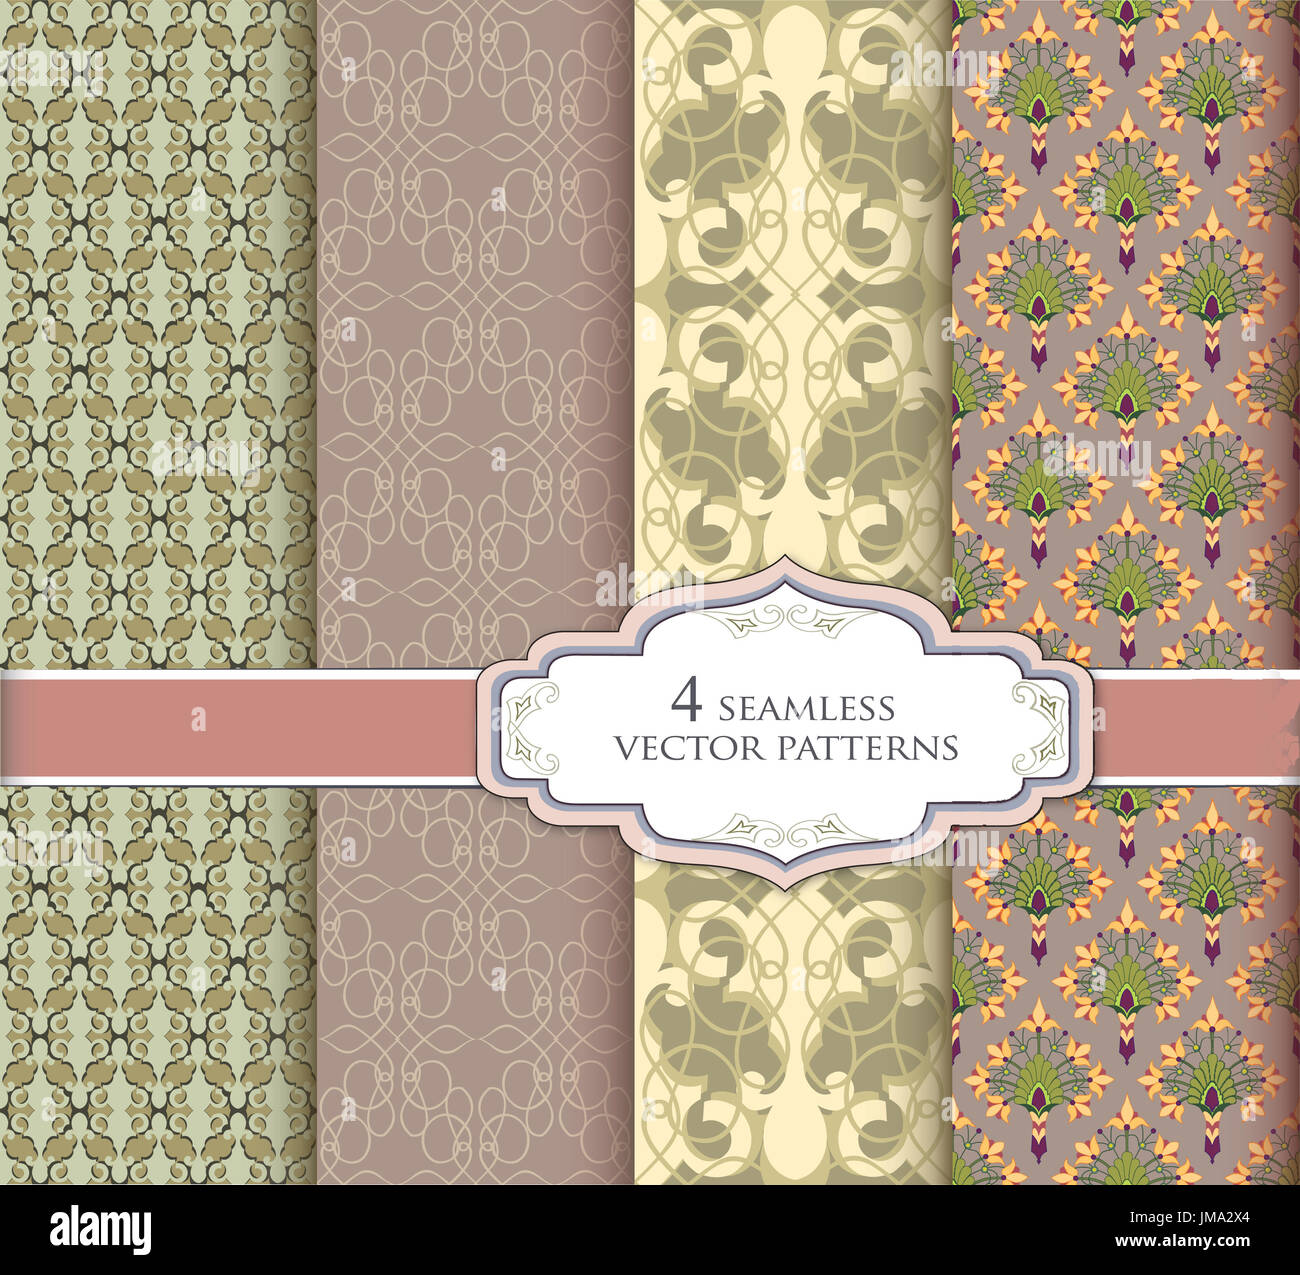 Seamless pattern set in vintage style. Abstract vector texture. Geometric backgrounds Stock Photo